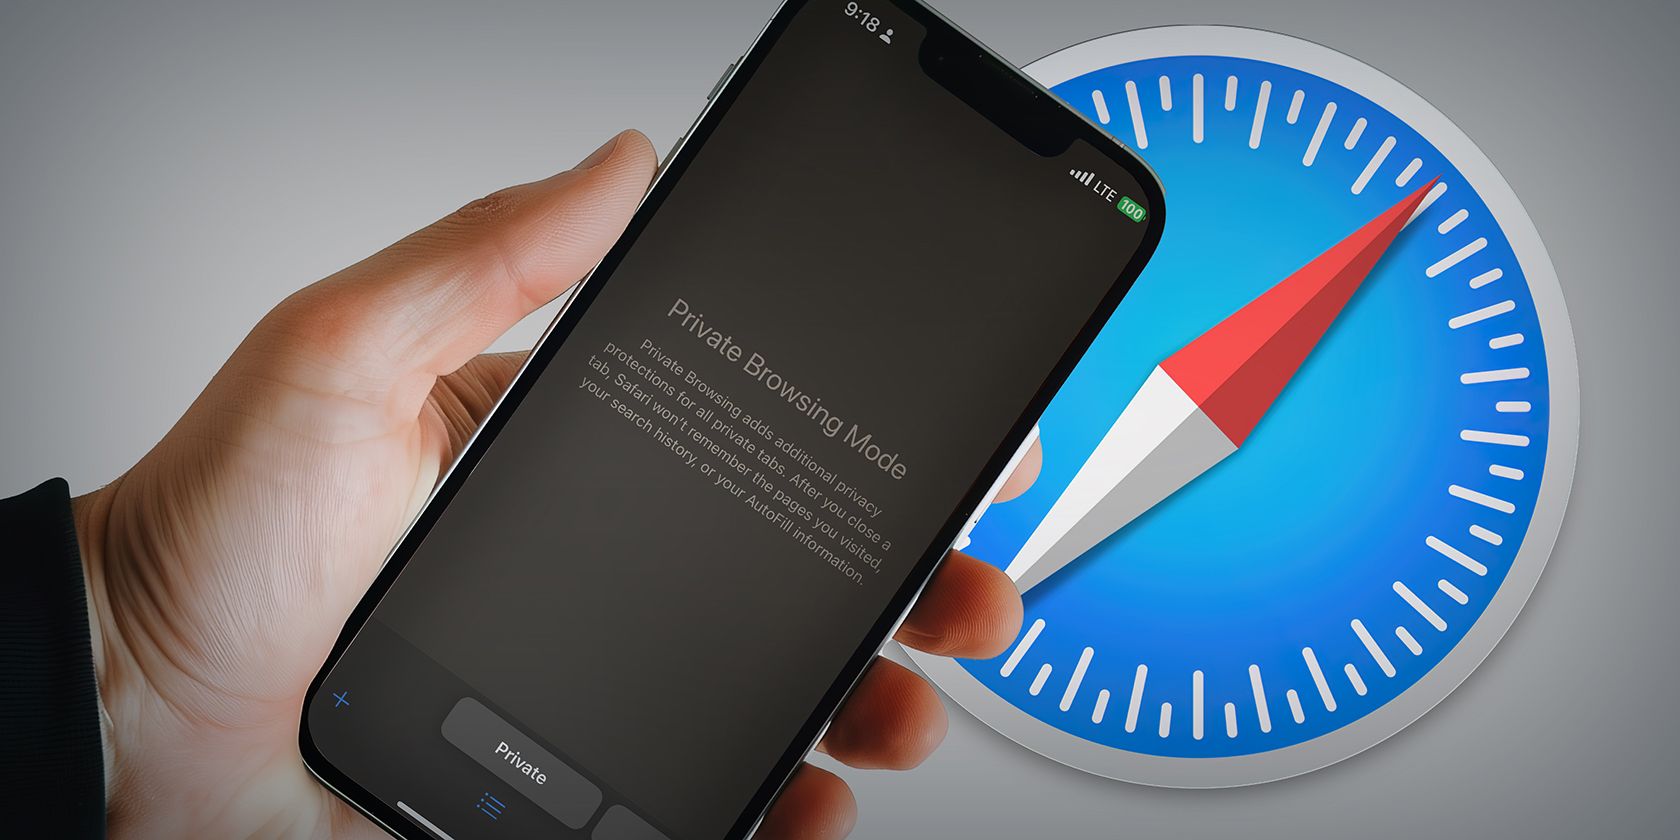 A phone displaying the Private Browsing Mode screen on Safari browser, held in a hand with a blurred compass dial in the background.